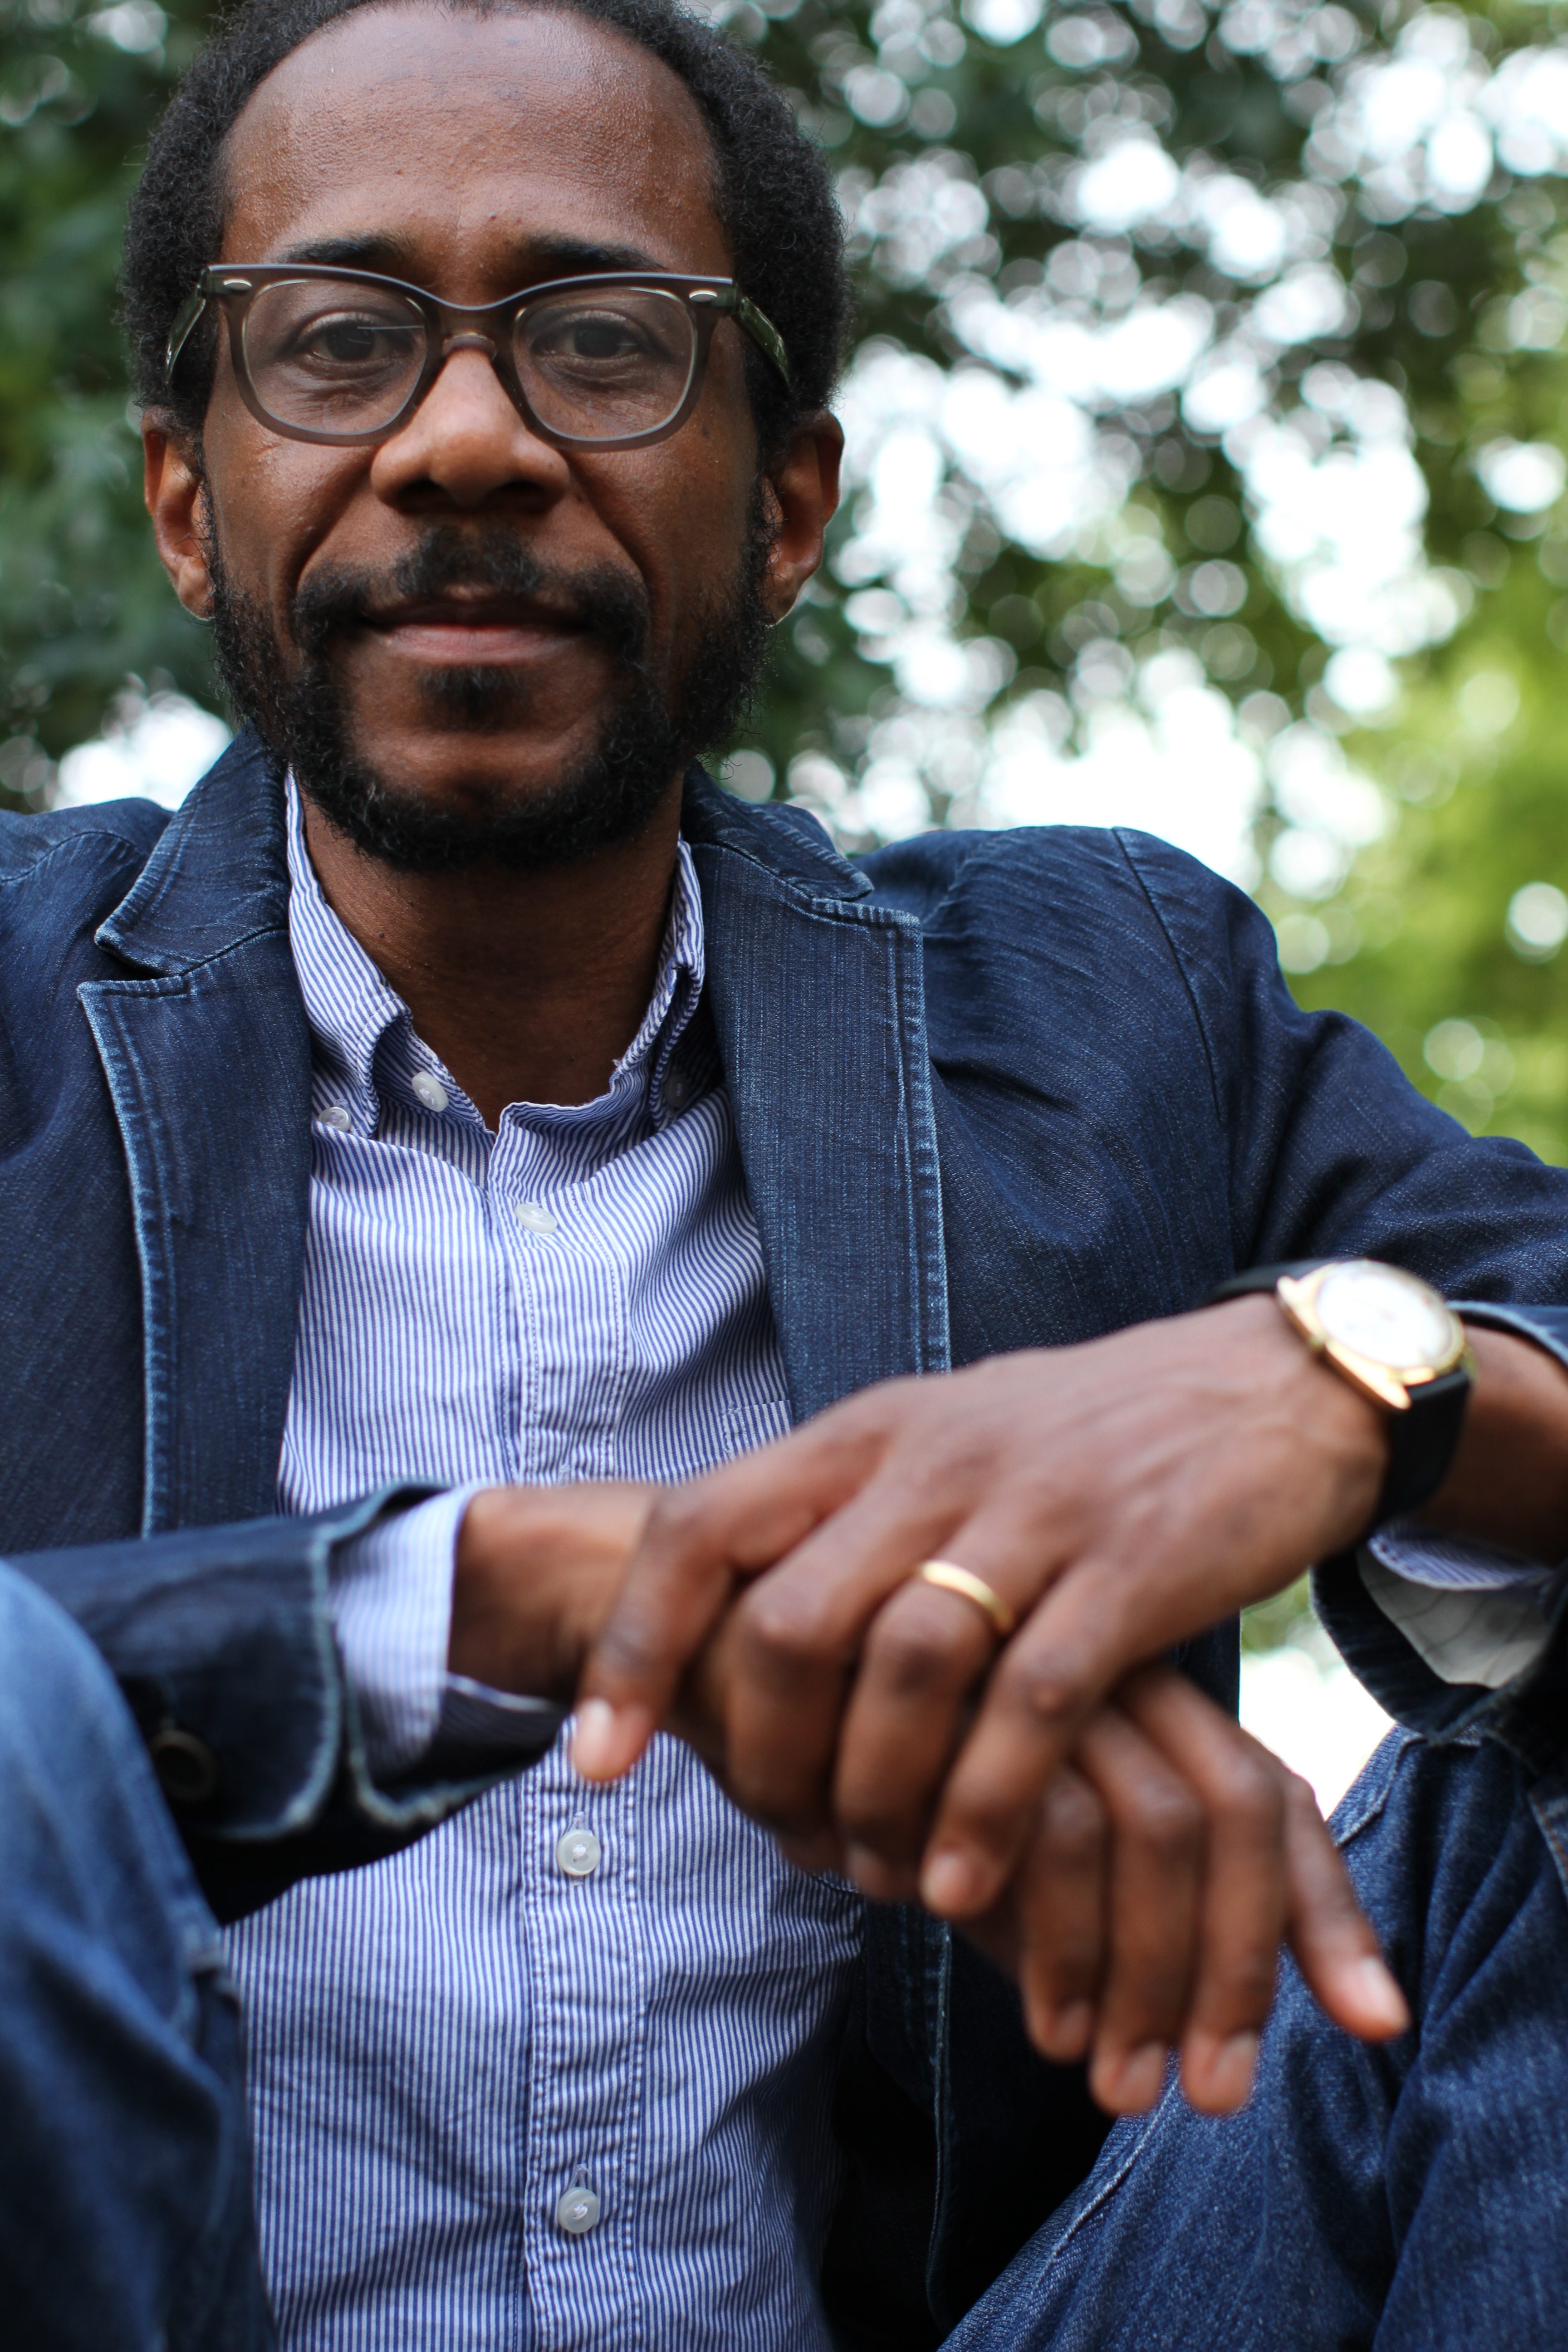 Drummer Brian Blade, who heads up the Brian Blade Fellowship Band, which will play two concerts June 19 night at La Jolla's Atheneaum Music & Arts Library.